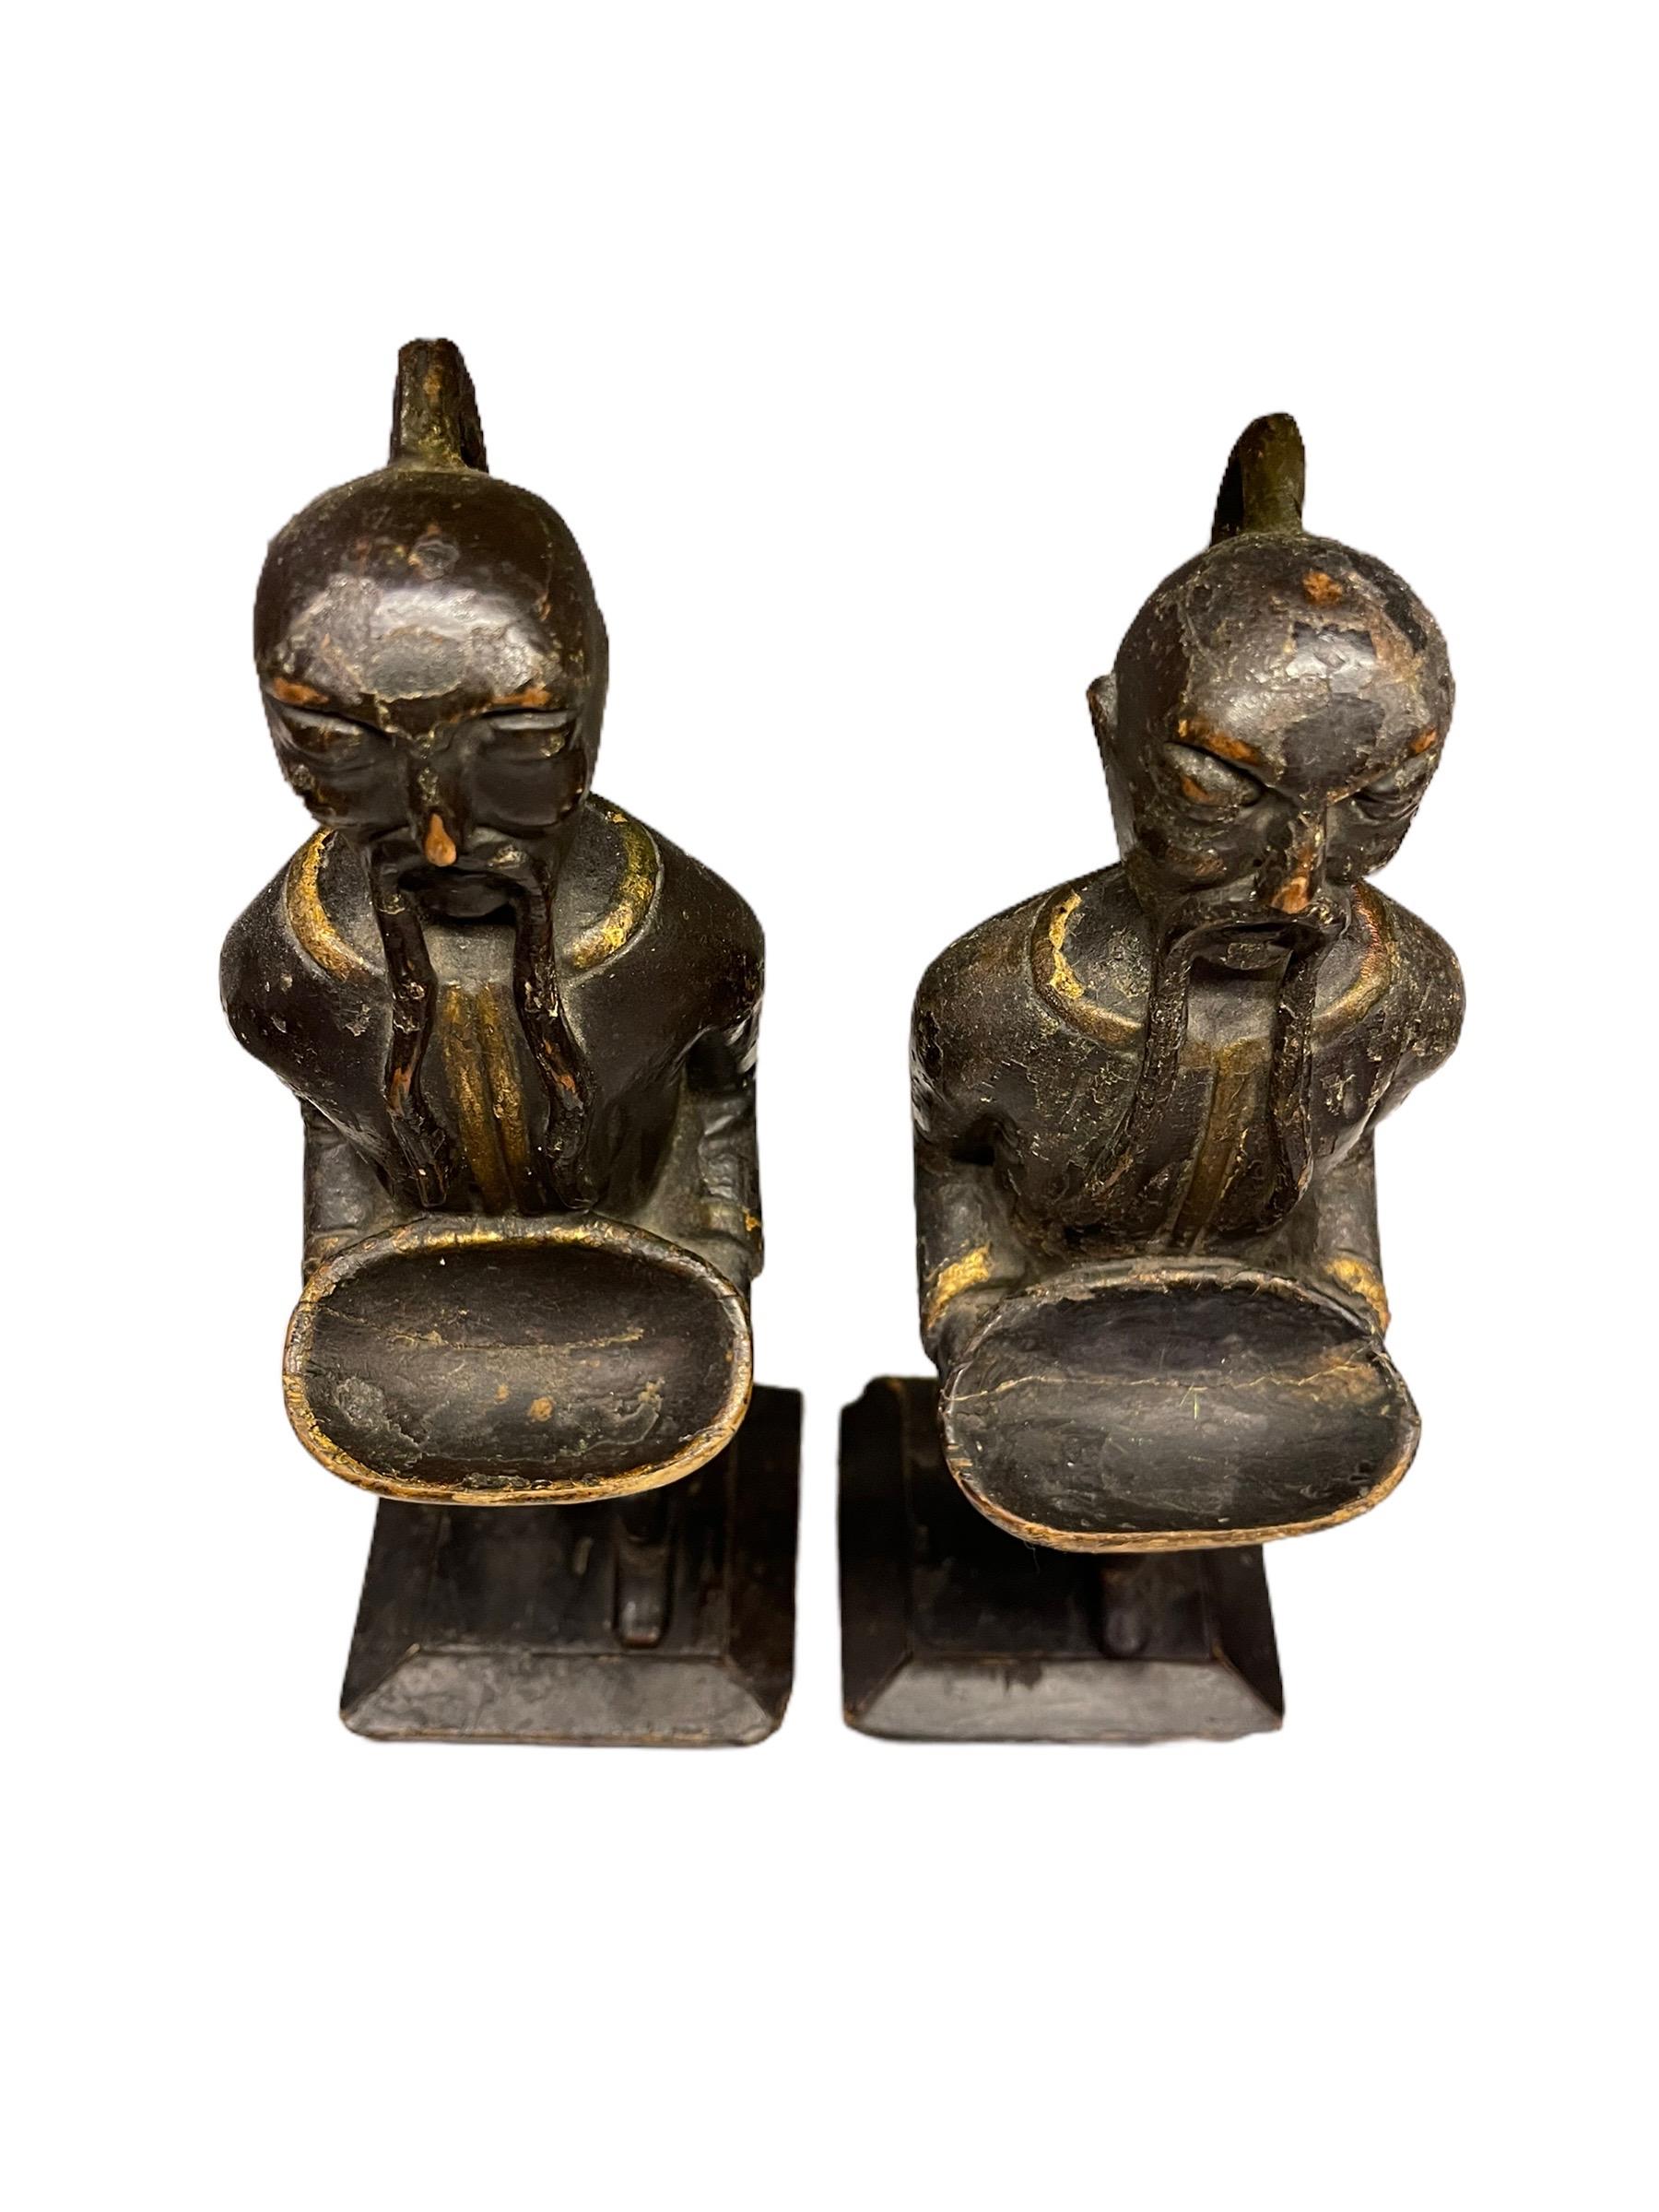 A pair of 18th Century English Chinoiserie carved wood ring holders modeled after Asian men. The pieces are polychromed and gold gilded. Both are holding trays which are used to place the rings.
     